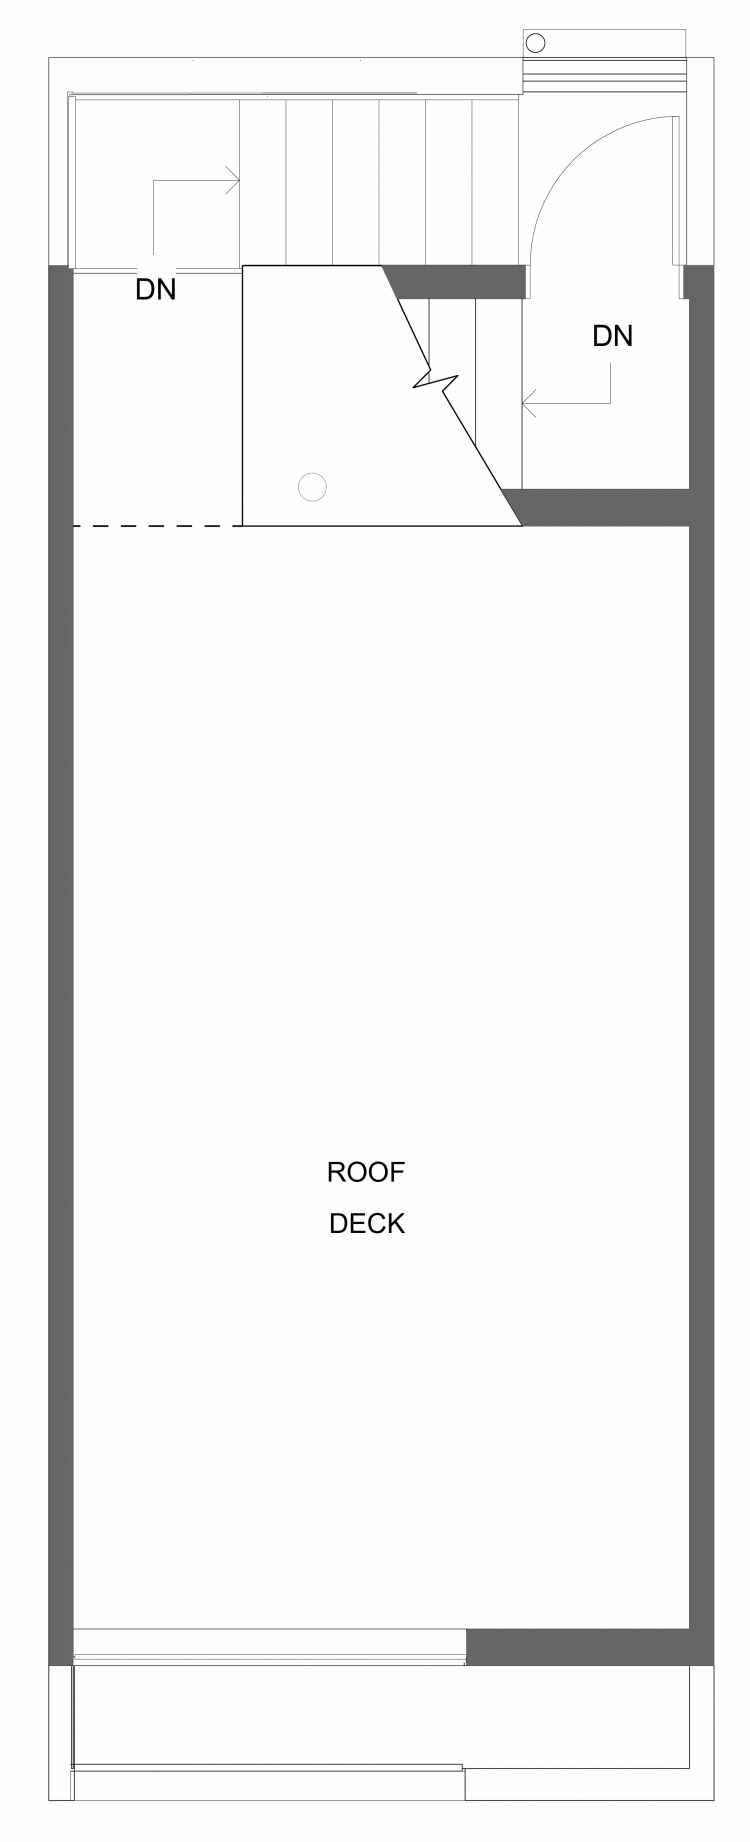 Roof Deck Floor Plan of 1542 15th Ave E, One of the Grandview Townhomes in Capitol Hill